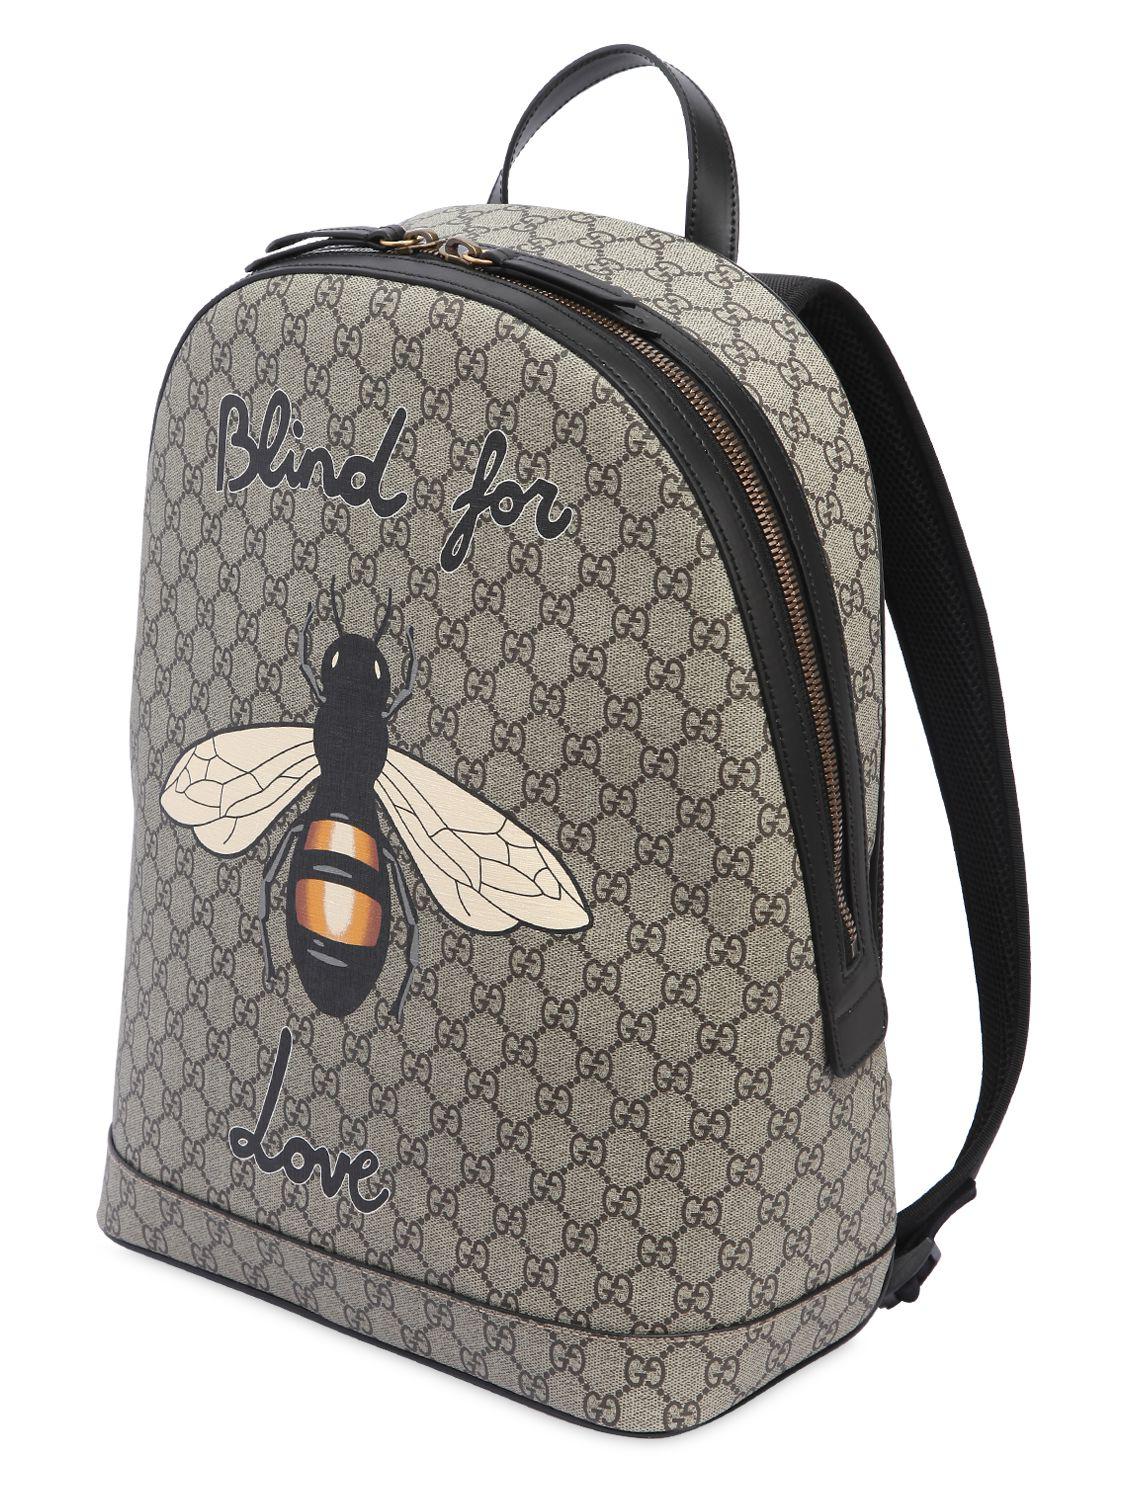 Gucci Leather Bee Printed Gg Supreme Backpack in Beige (Natural) for Men - Lyst